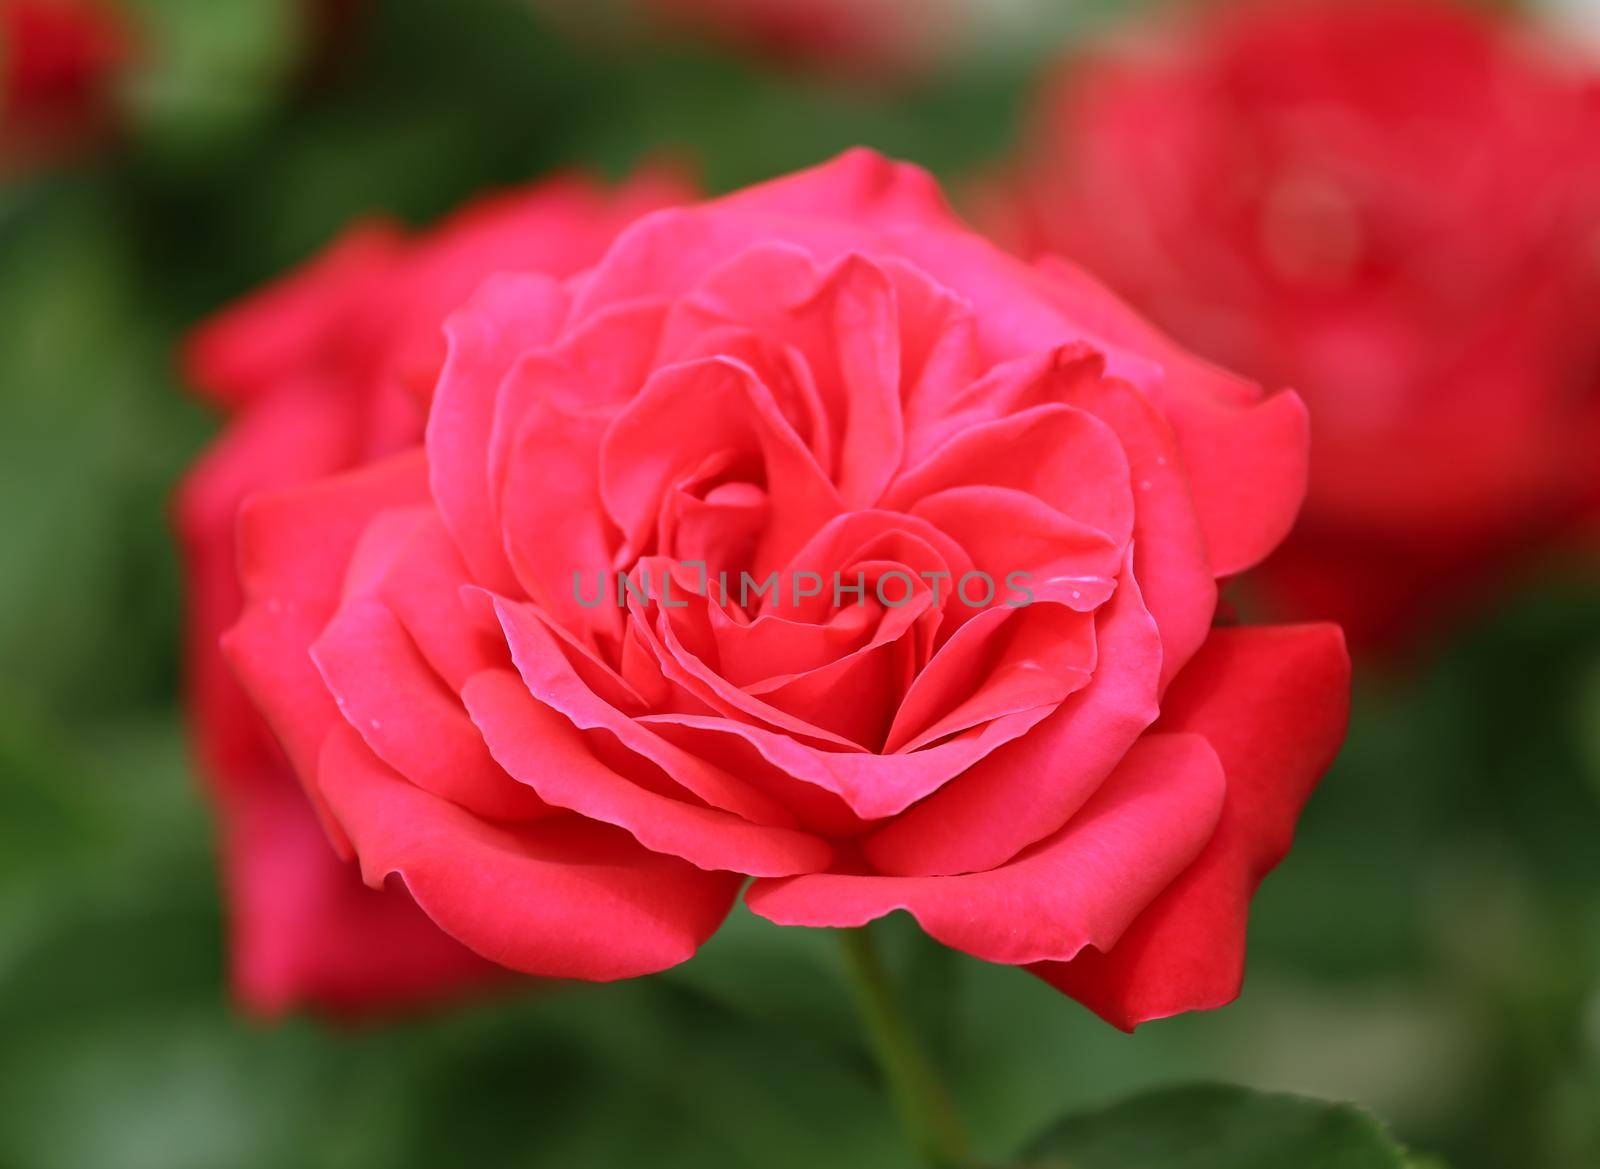 Macro shot of a single bright pink or light red rose in full bloom with petals wide open and a vibrant green and soft white background. by lunarts